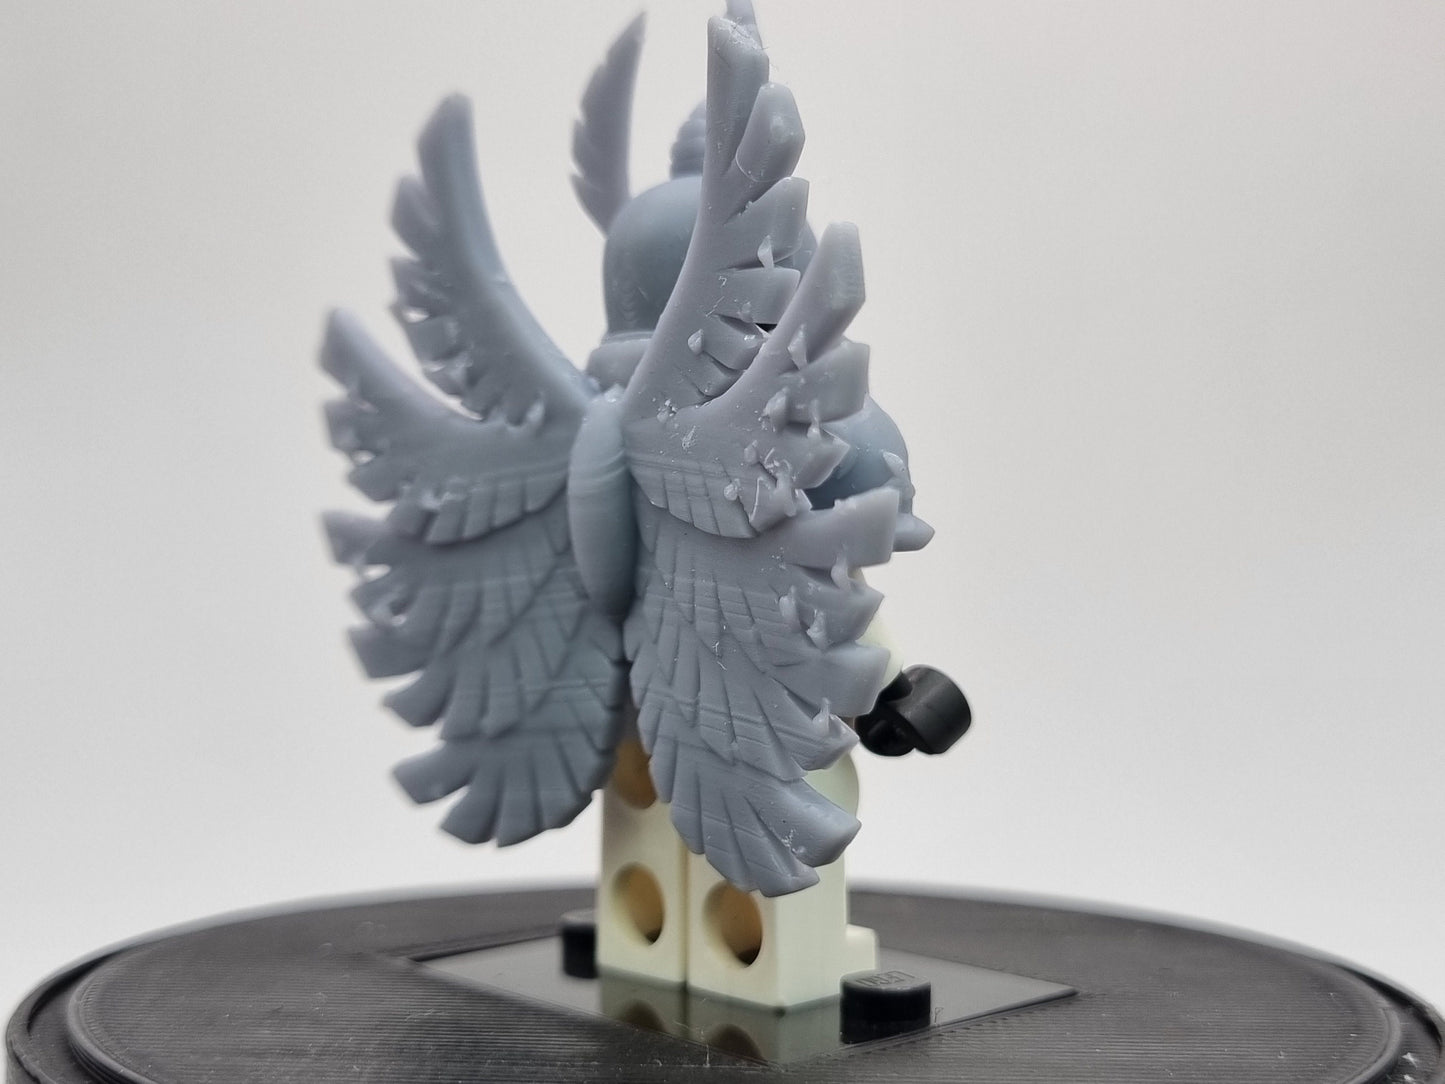 Building toy custom 3D printed winged warrior!